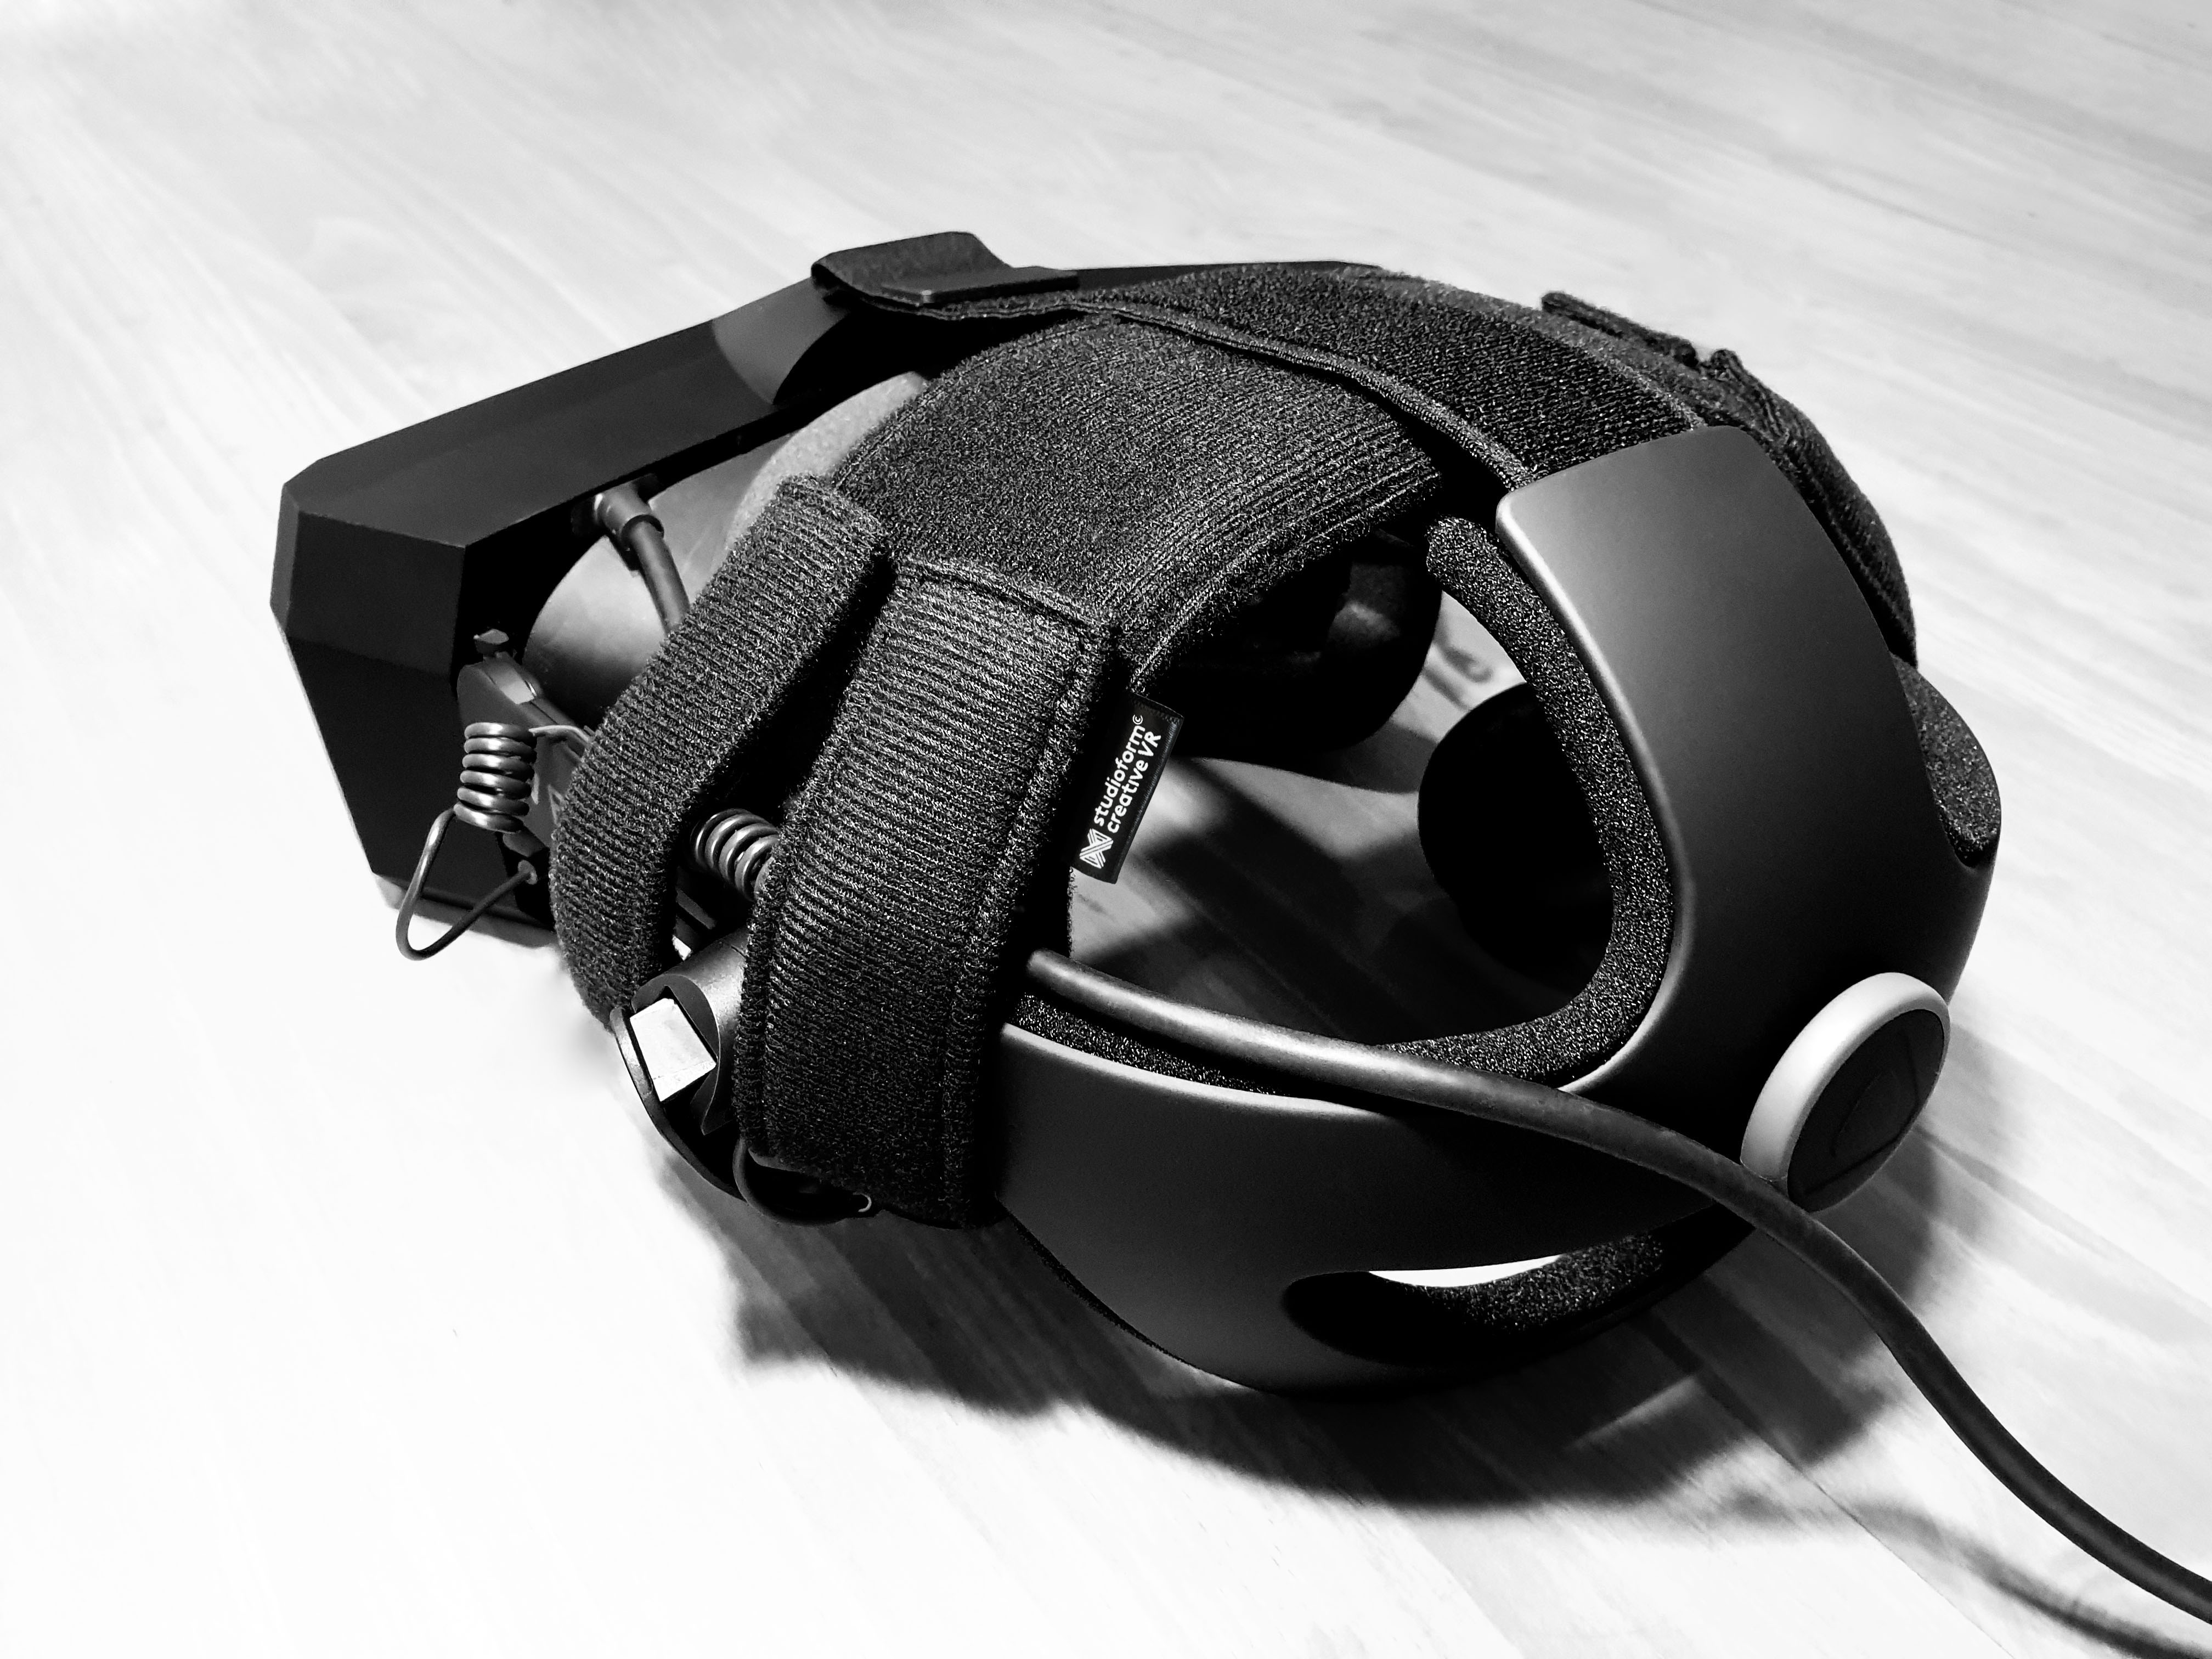 New Comfort Mods For Pimax Head Strap. Available To Buy Now